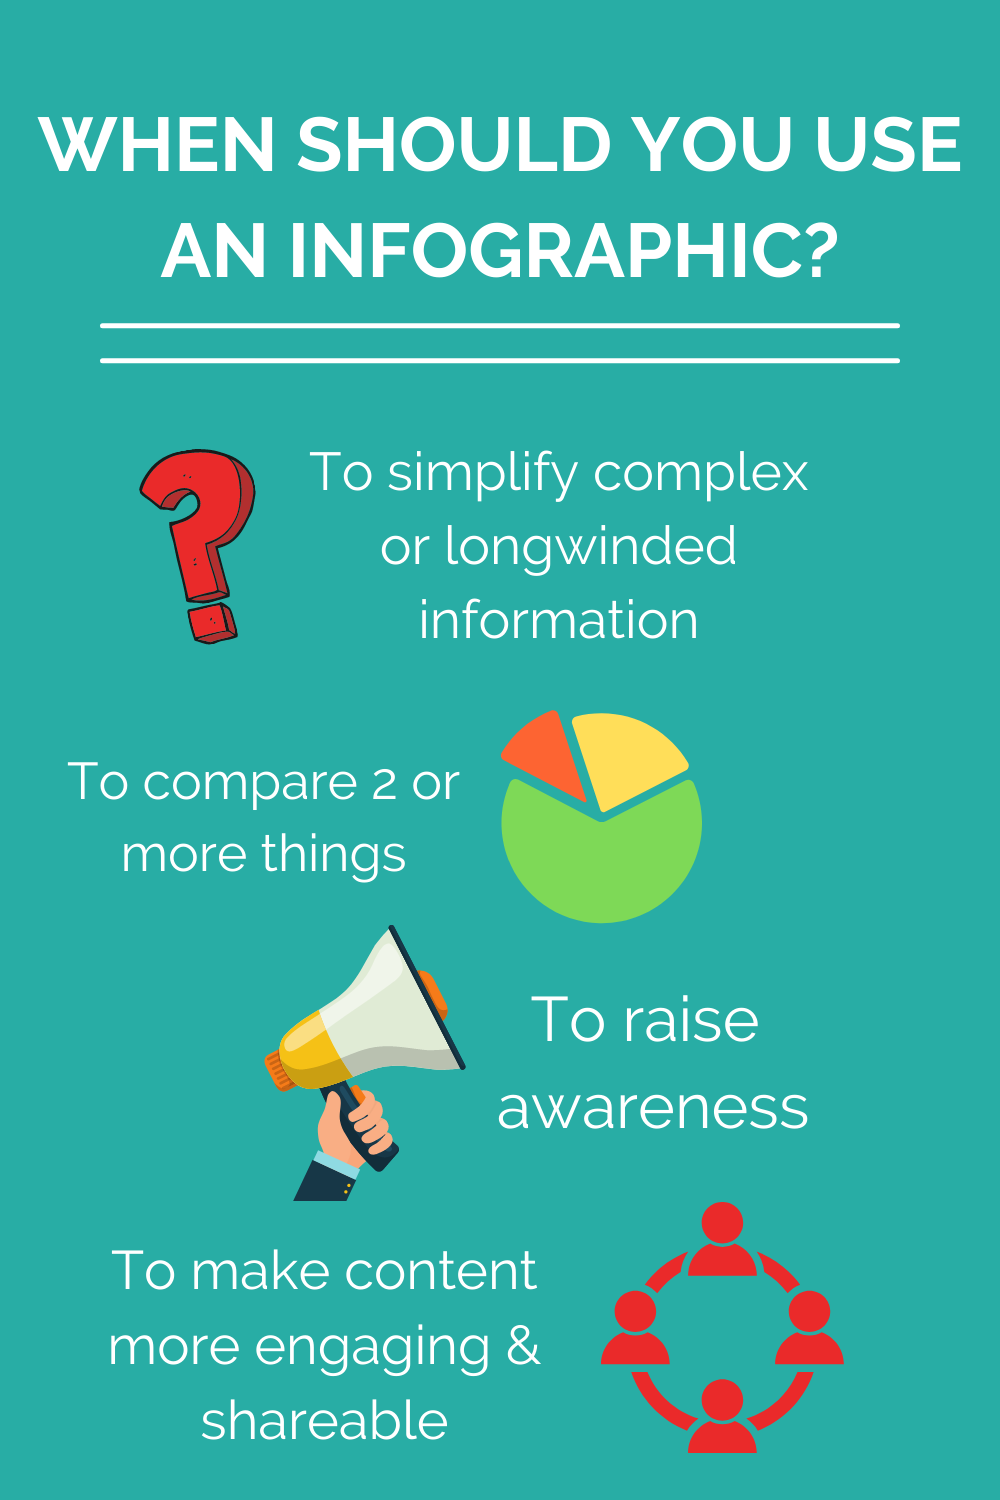 WHEN SHOULD YOU USE AN INFOGRAPHIC